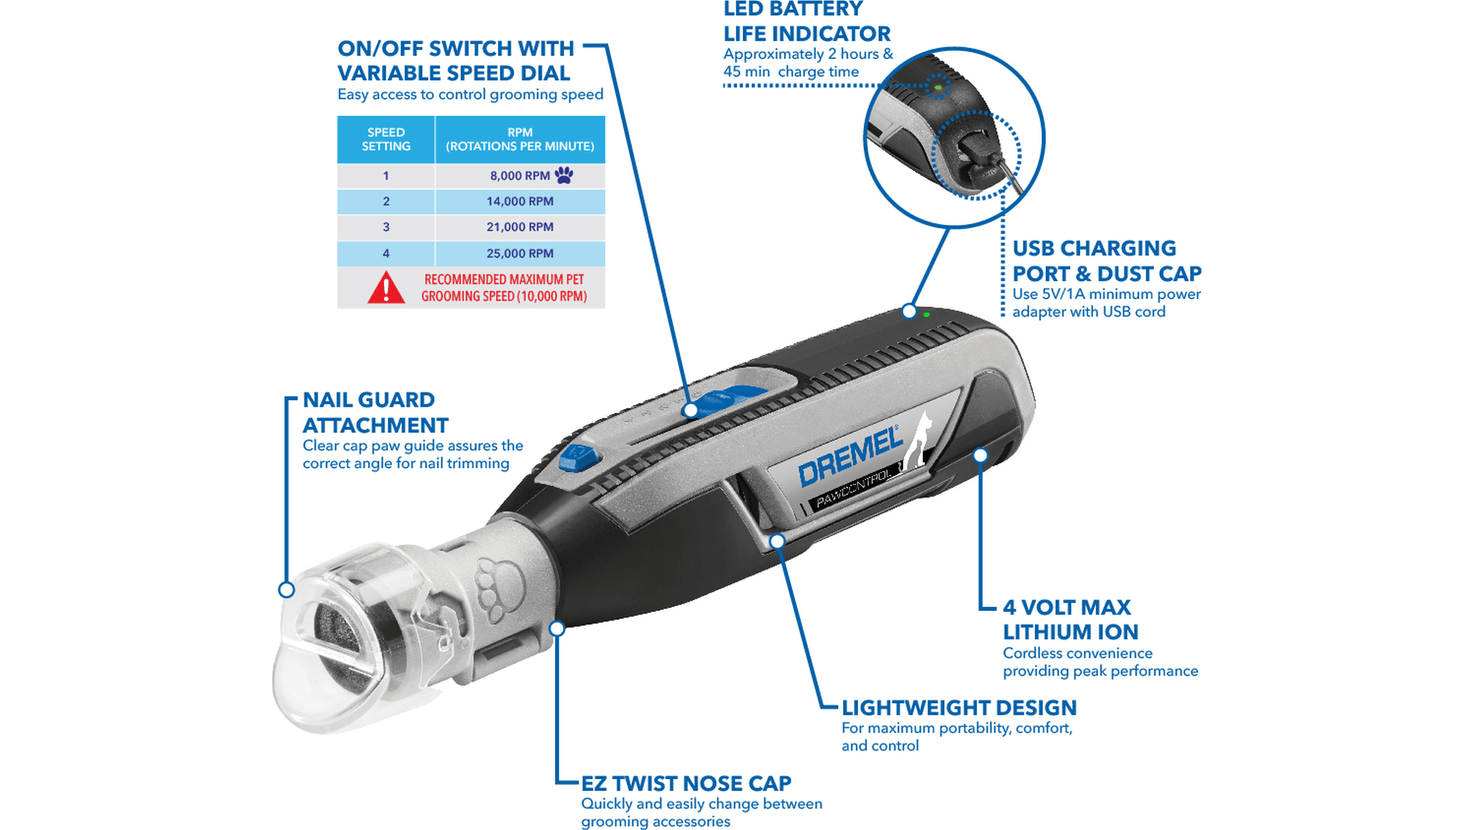 Dremel Lite 7760 Rotary Tool Complete Review And Accessory Overview 